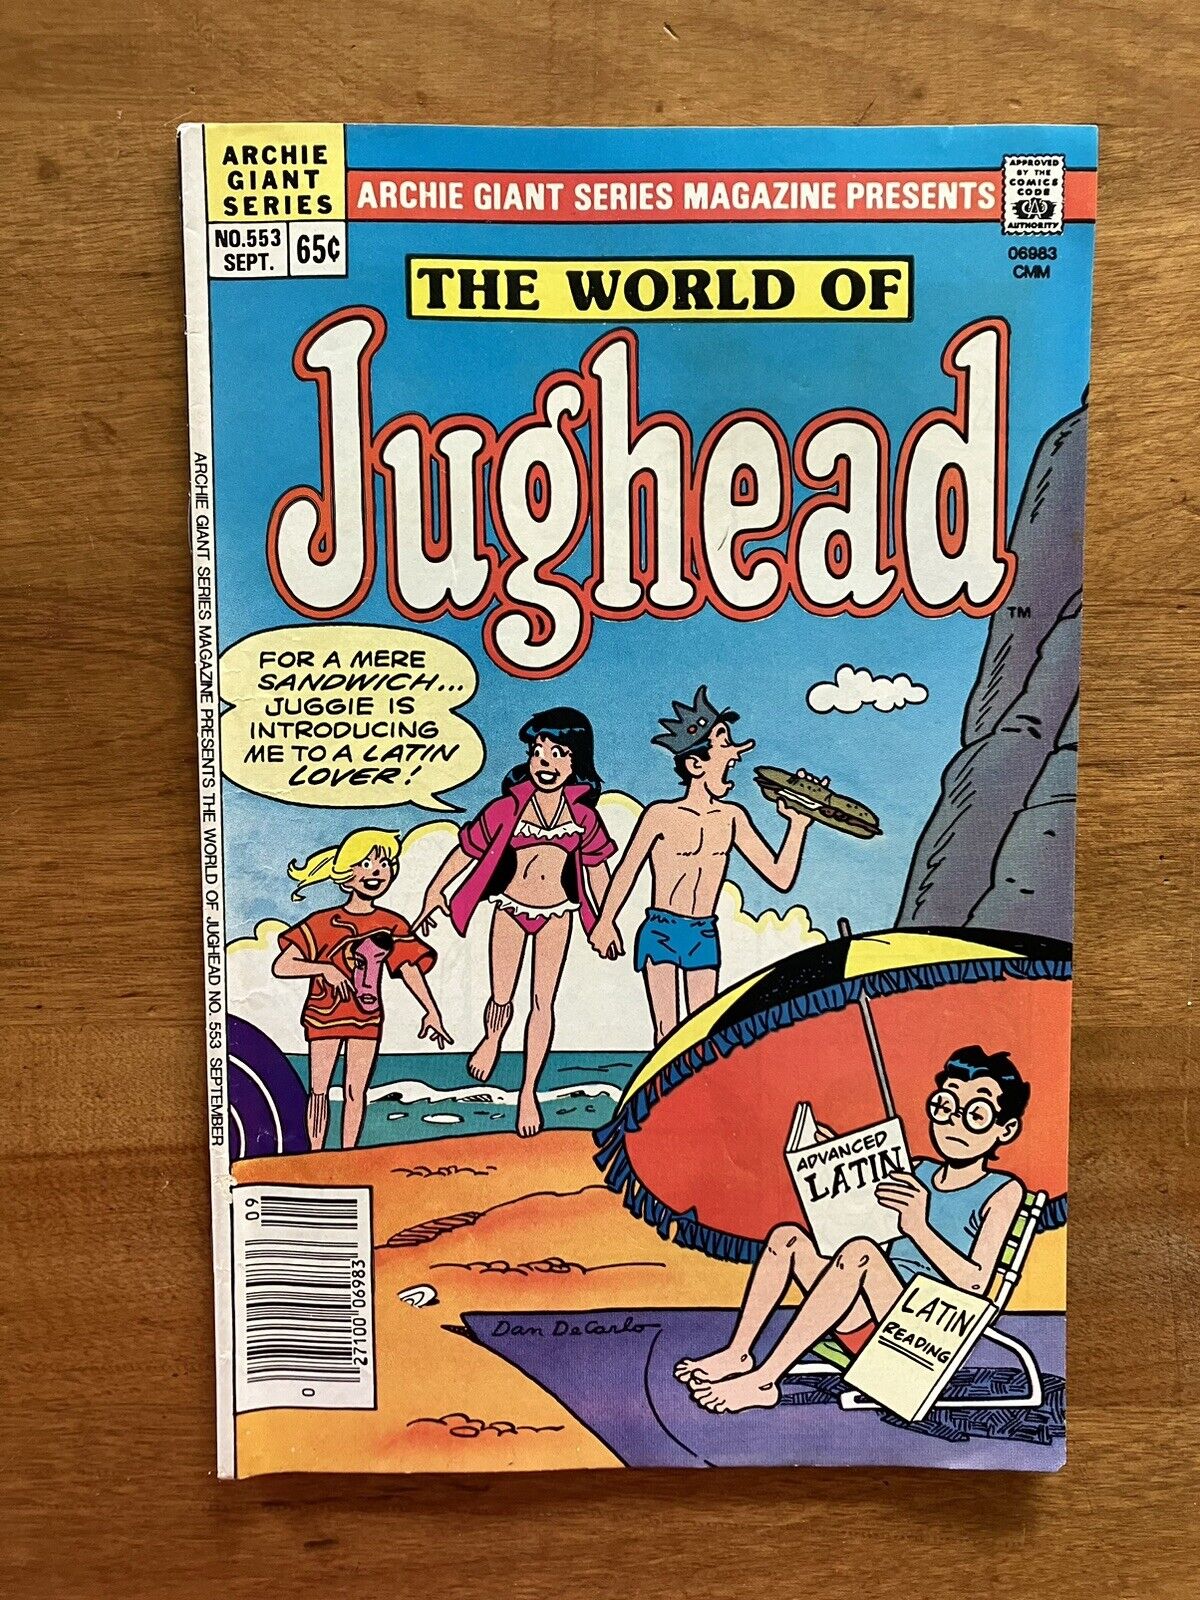 Sept. 1985 Archie Giant Series “The World of Jughead” Comic Book #553